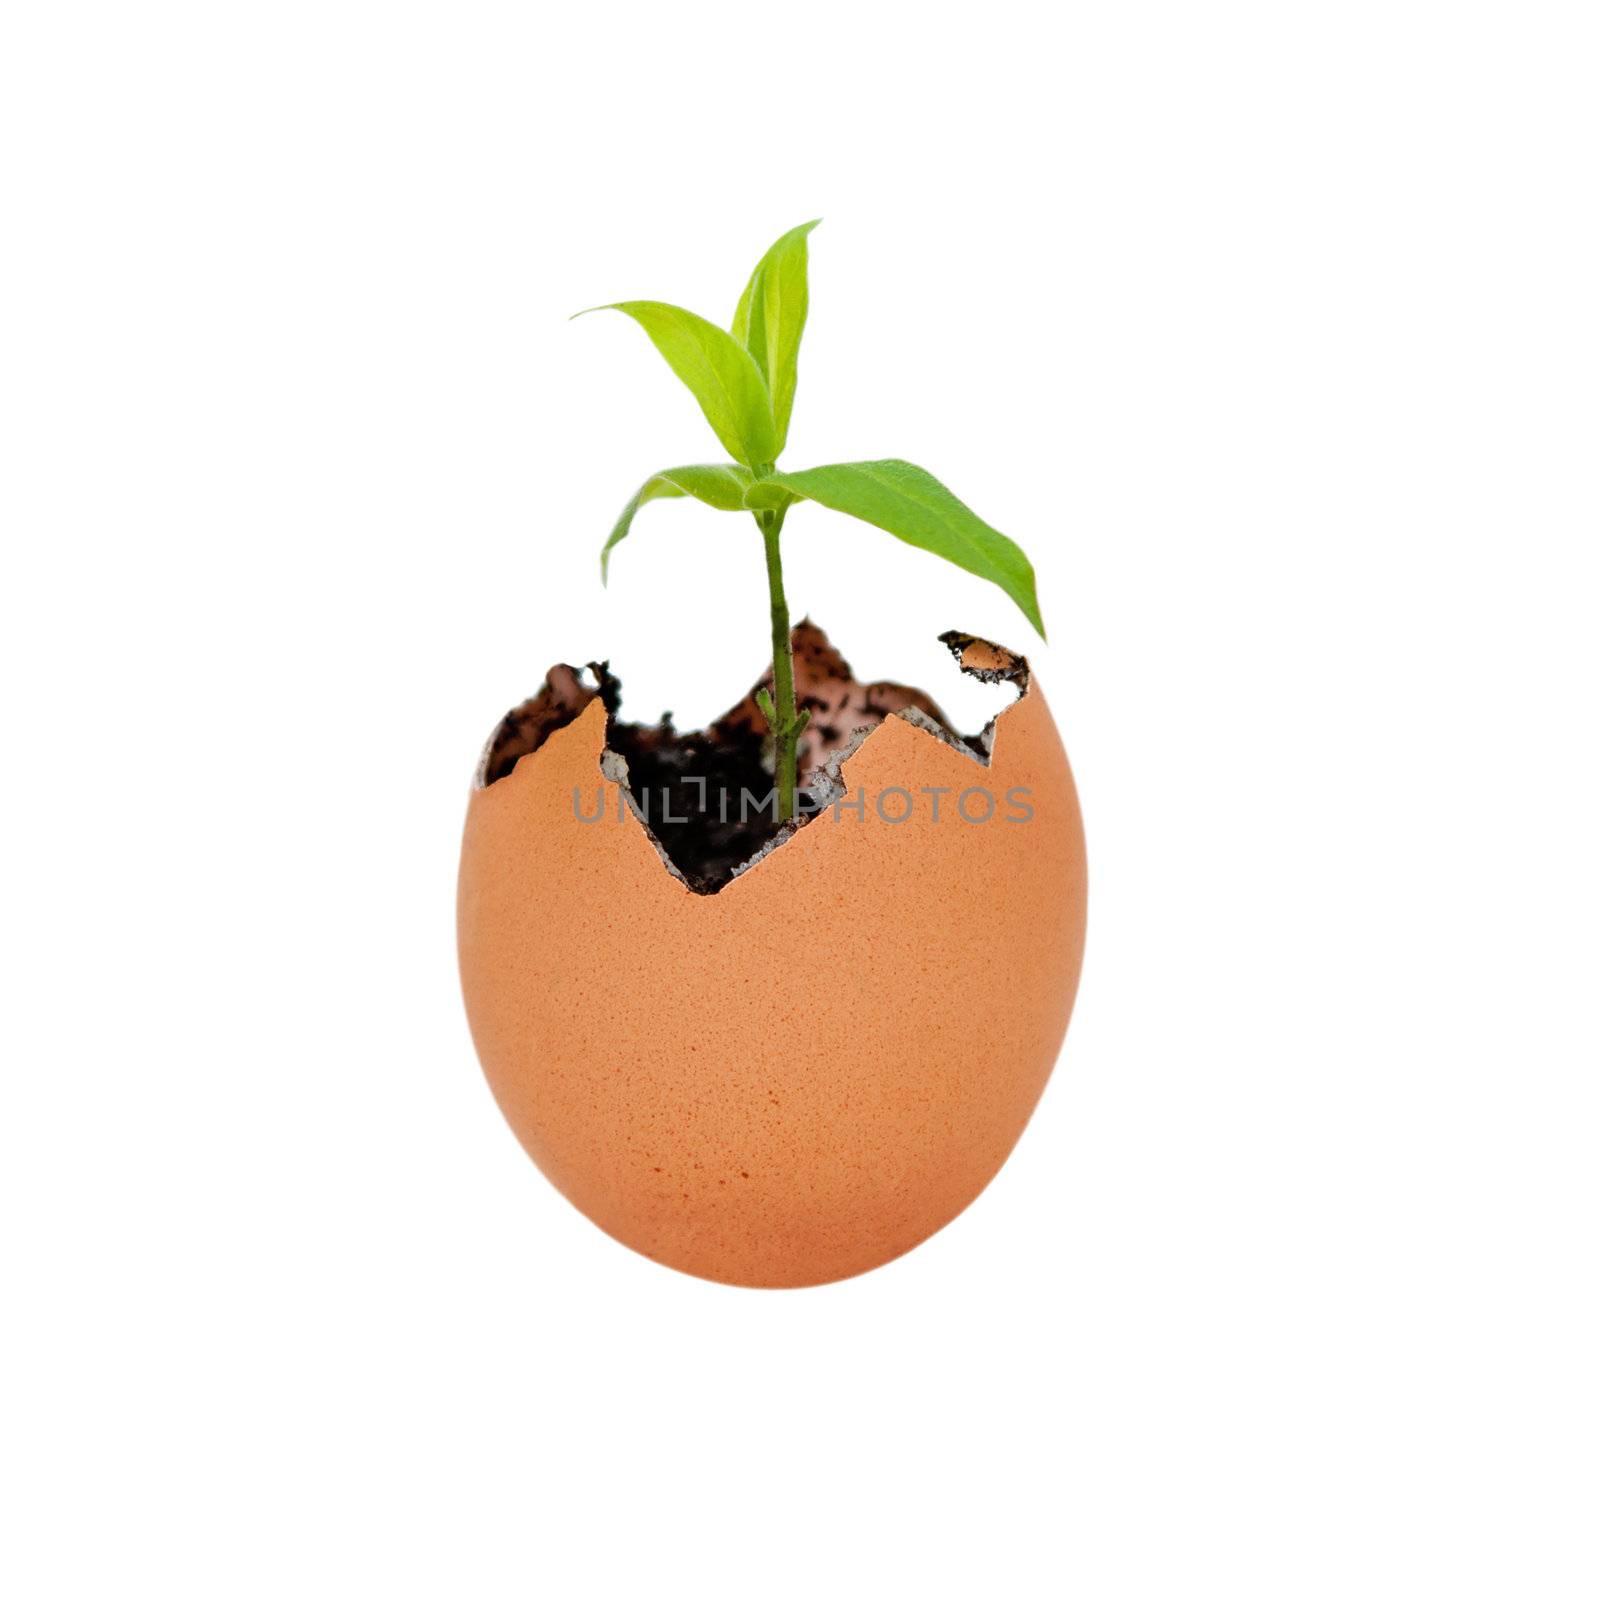 Brown egg shell cracked open with Earth dirt sand and sprouting green plant growing metaphor for new life and environment, isolated.